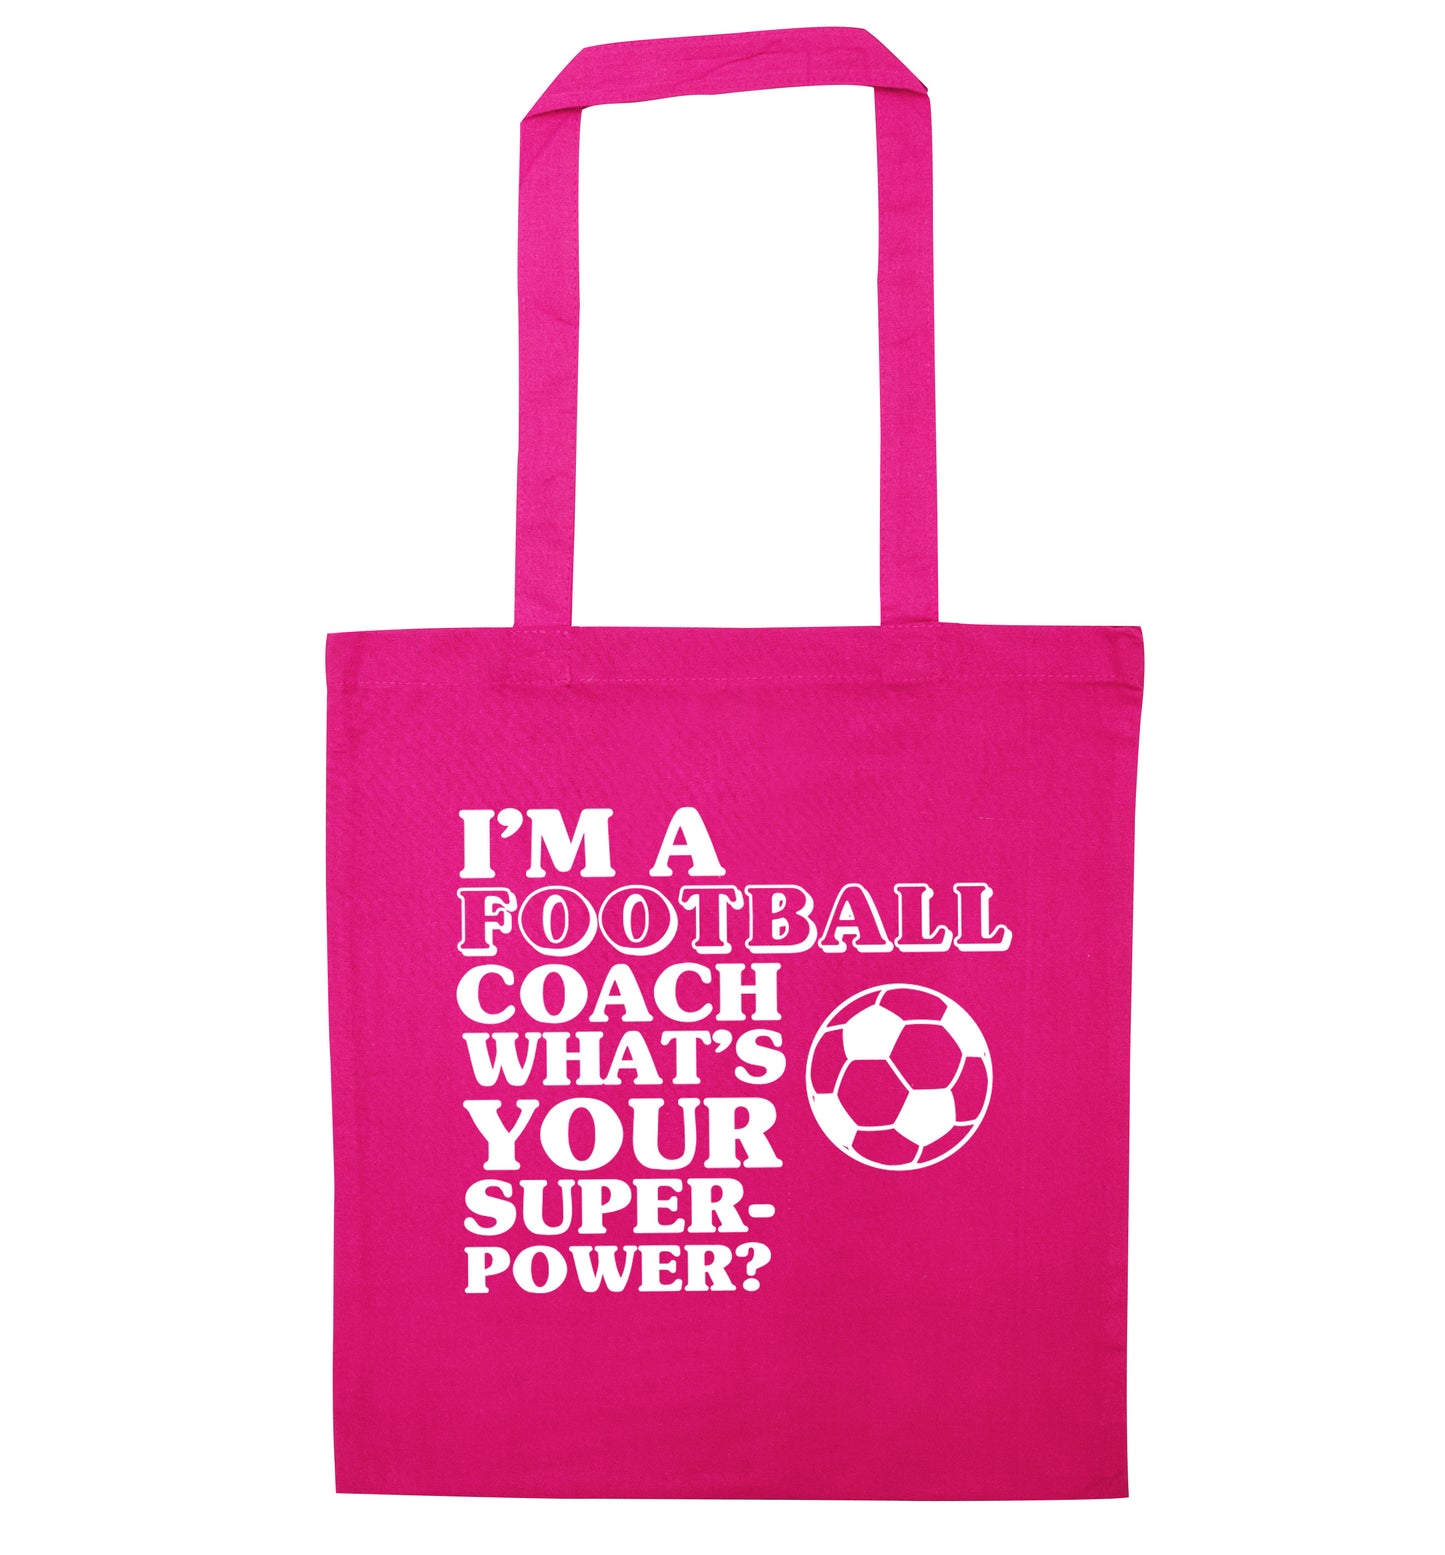 I'm a football coach what's your superpower? pink tote bag